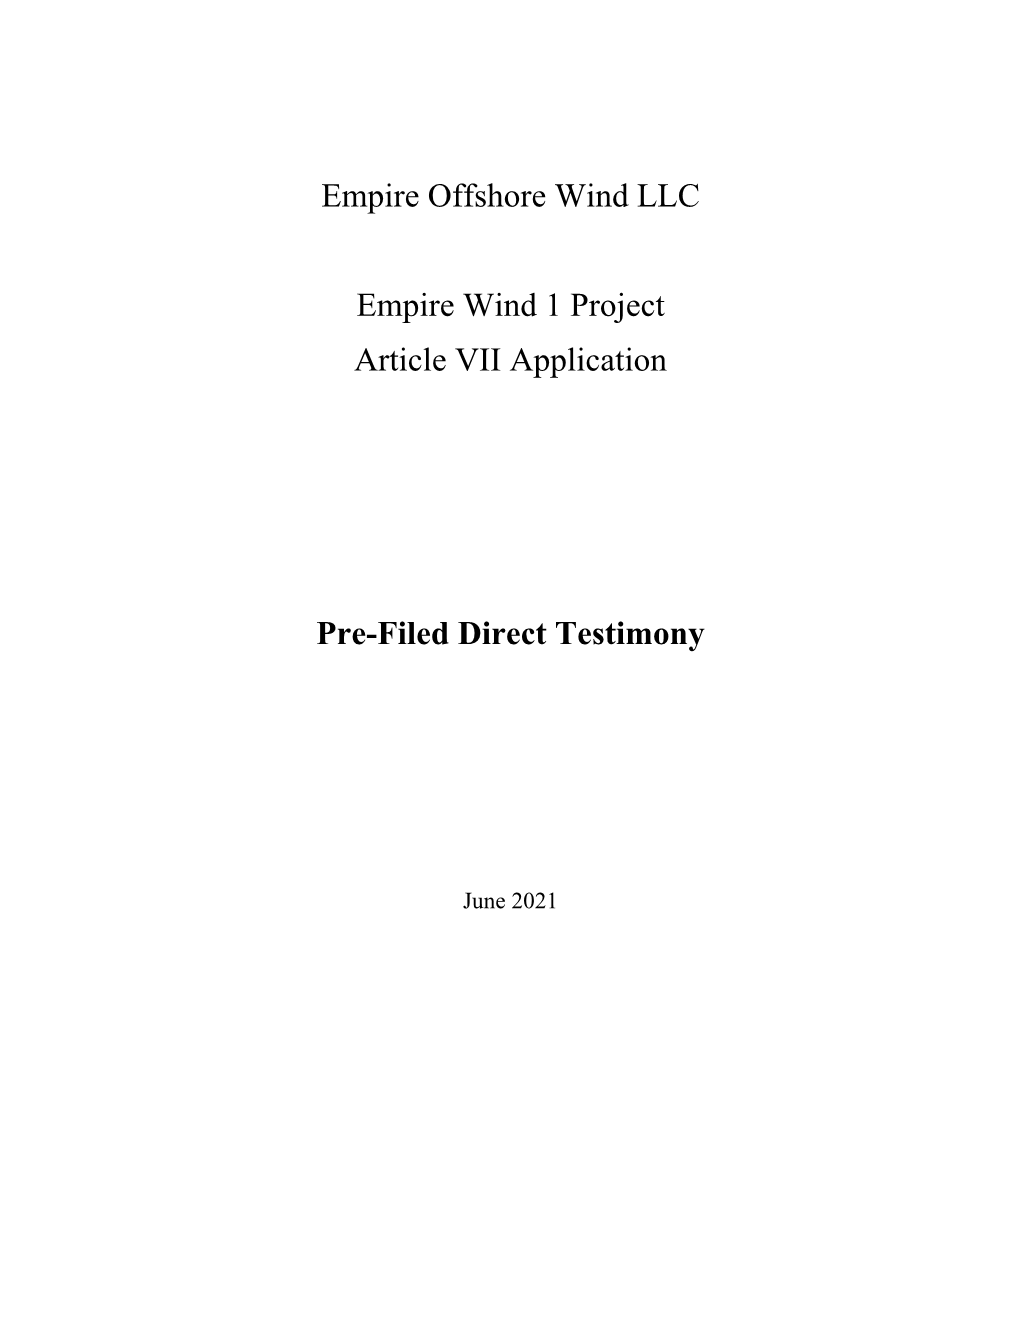 Empire Offshore Wind LLC Empire Wind 1 Project Article VII